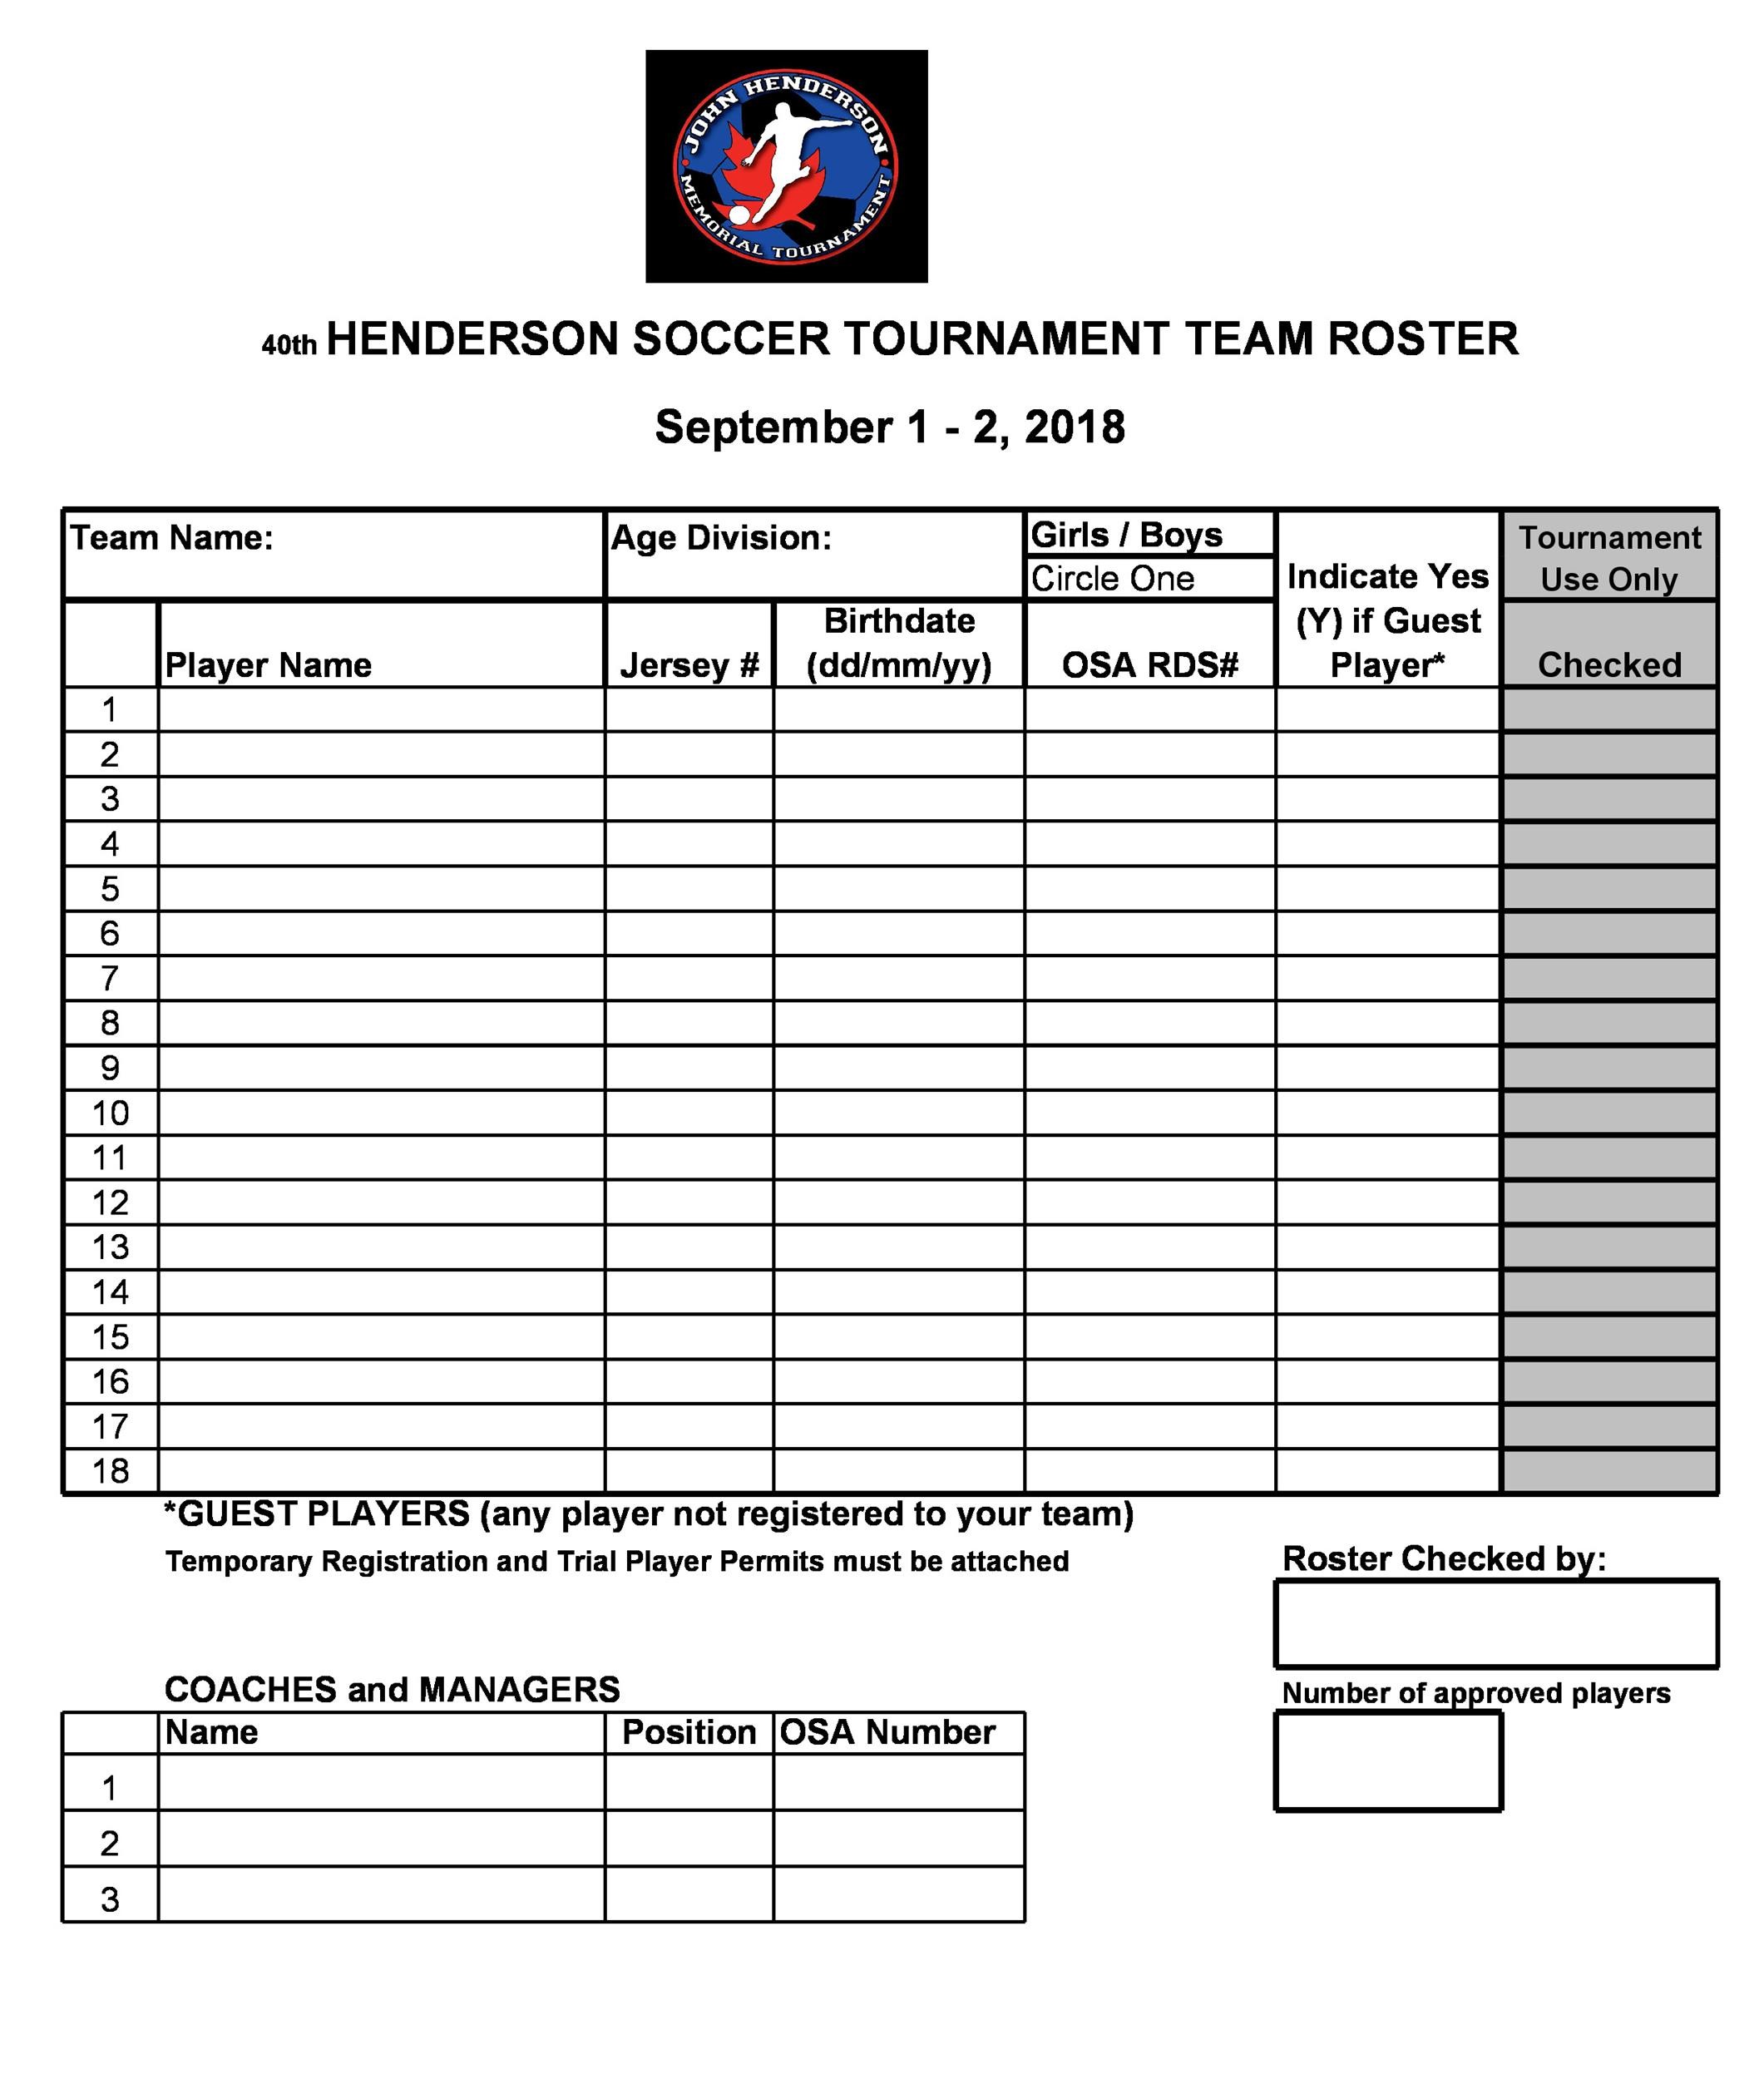 Team Roster Template